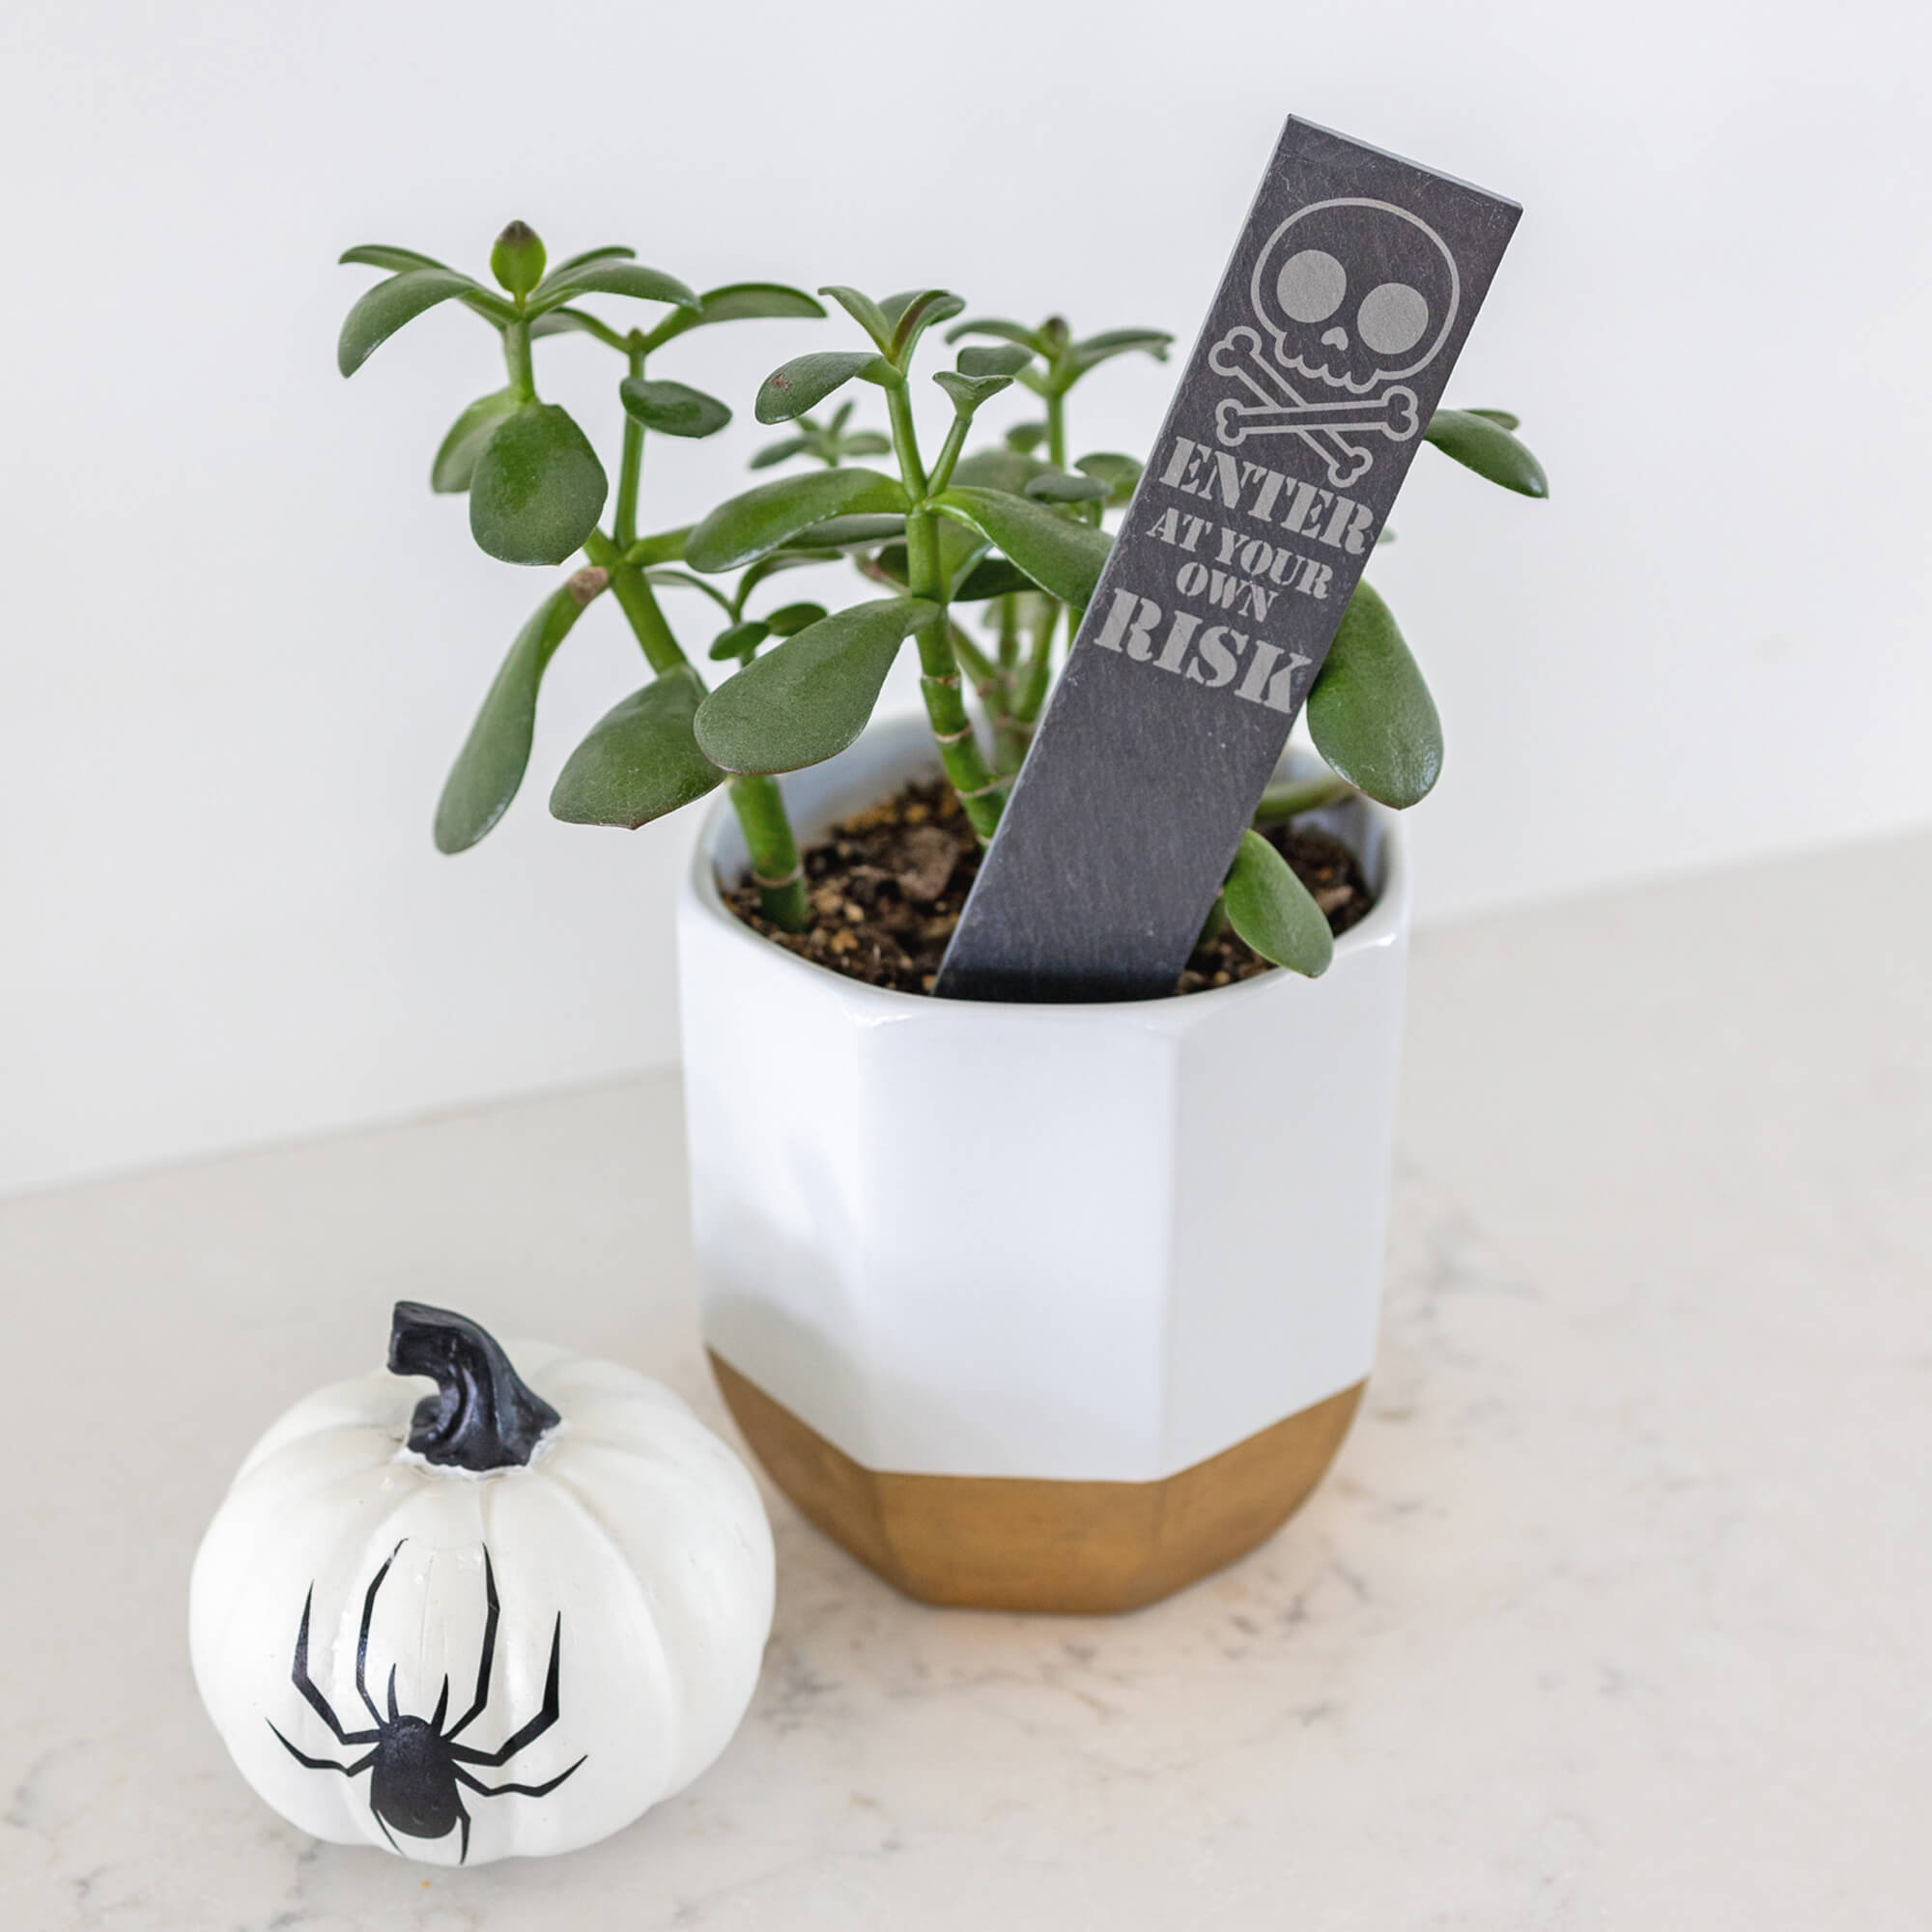 Enter at Your Own Risk - Halloween Garden Markers - Slate